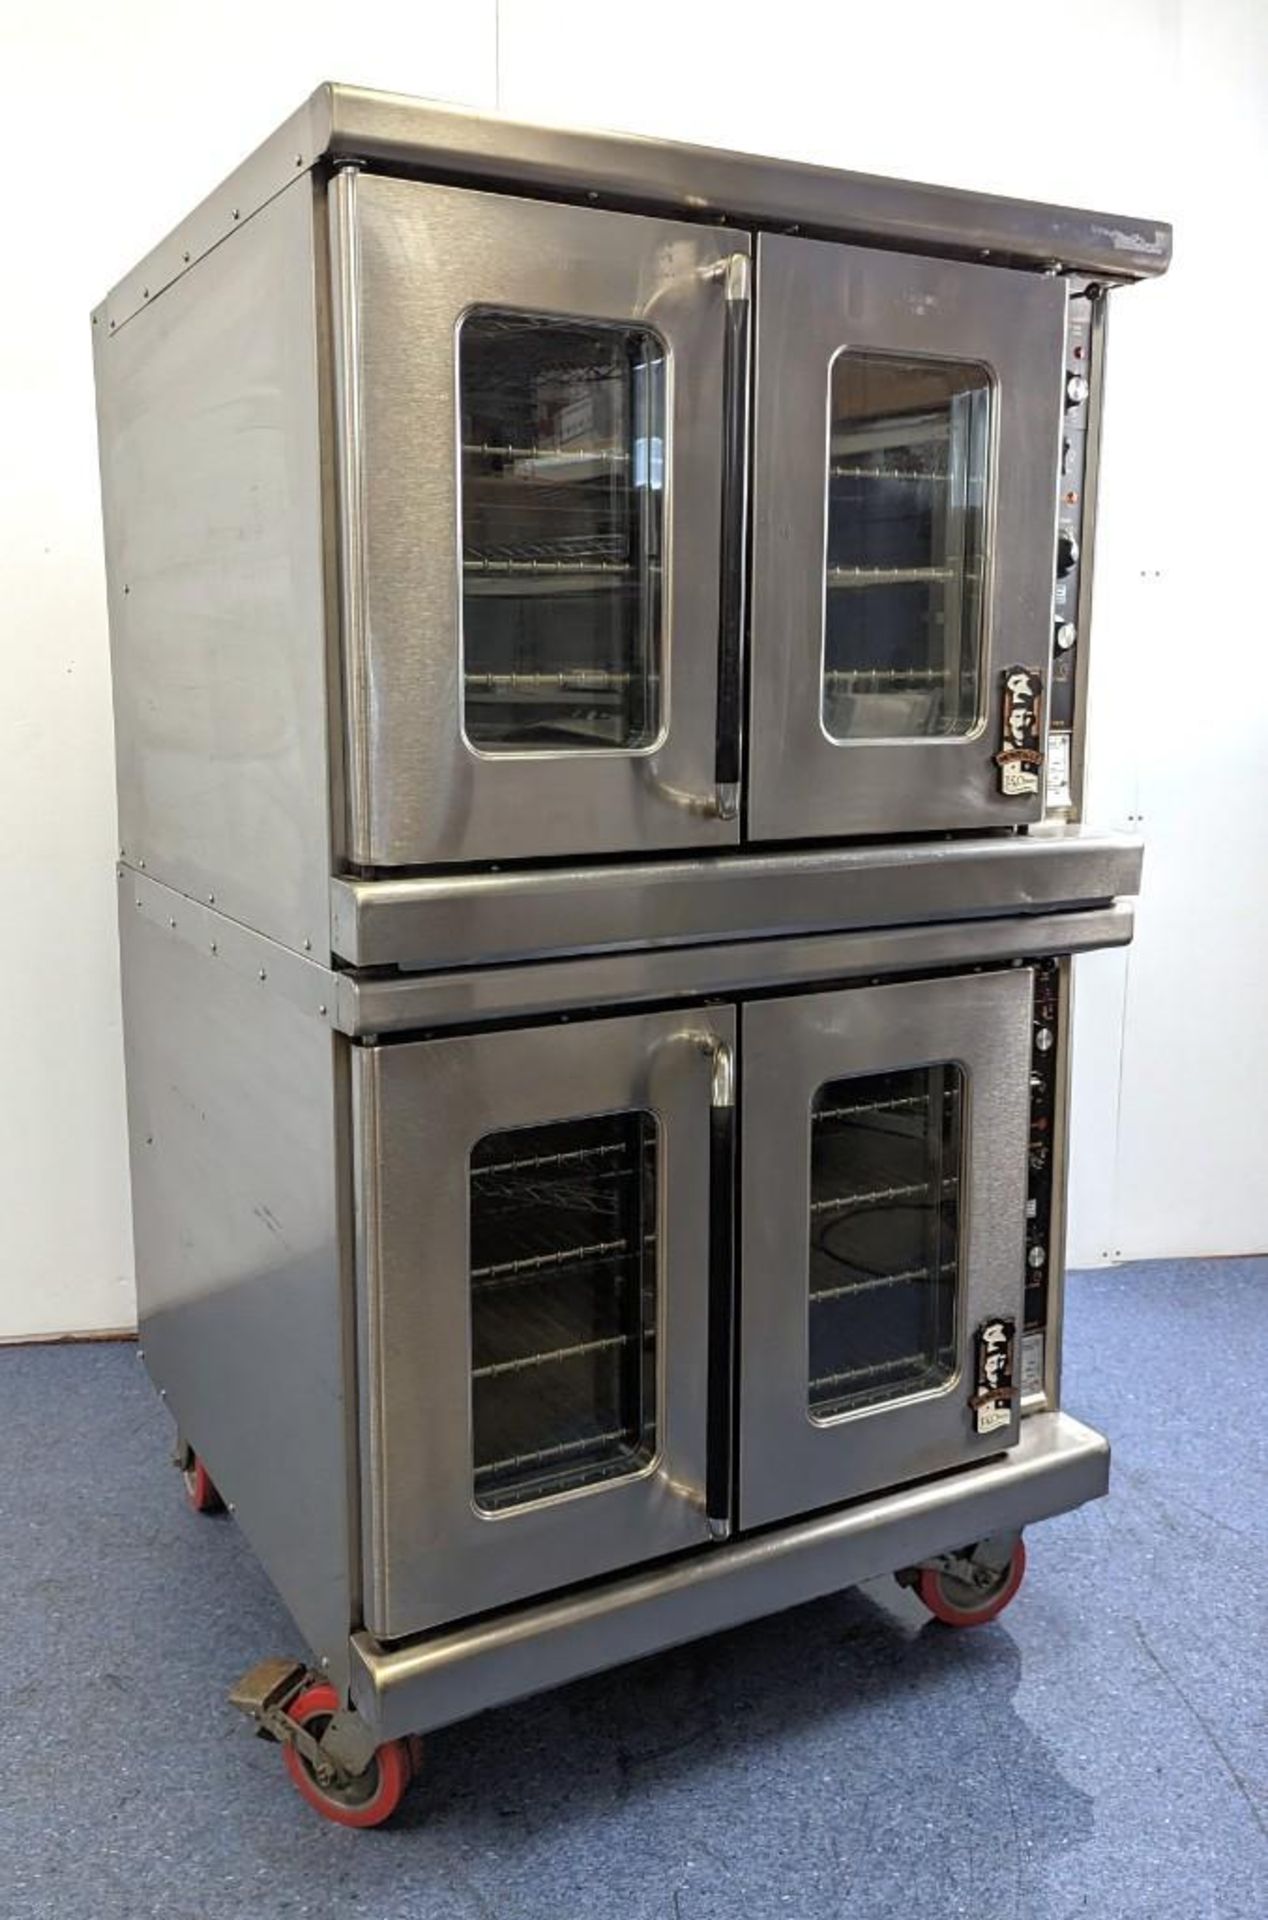 MONTAGUE EK15A VECTAIRE SINGLE PHASE ELECTRIC CONVECTION OVENS - Image 2 of 13